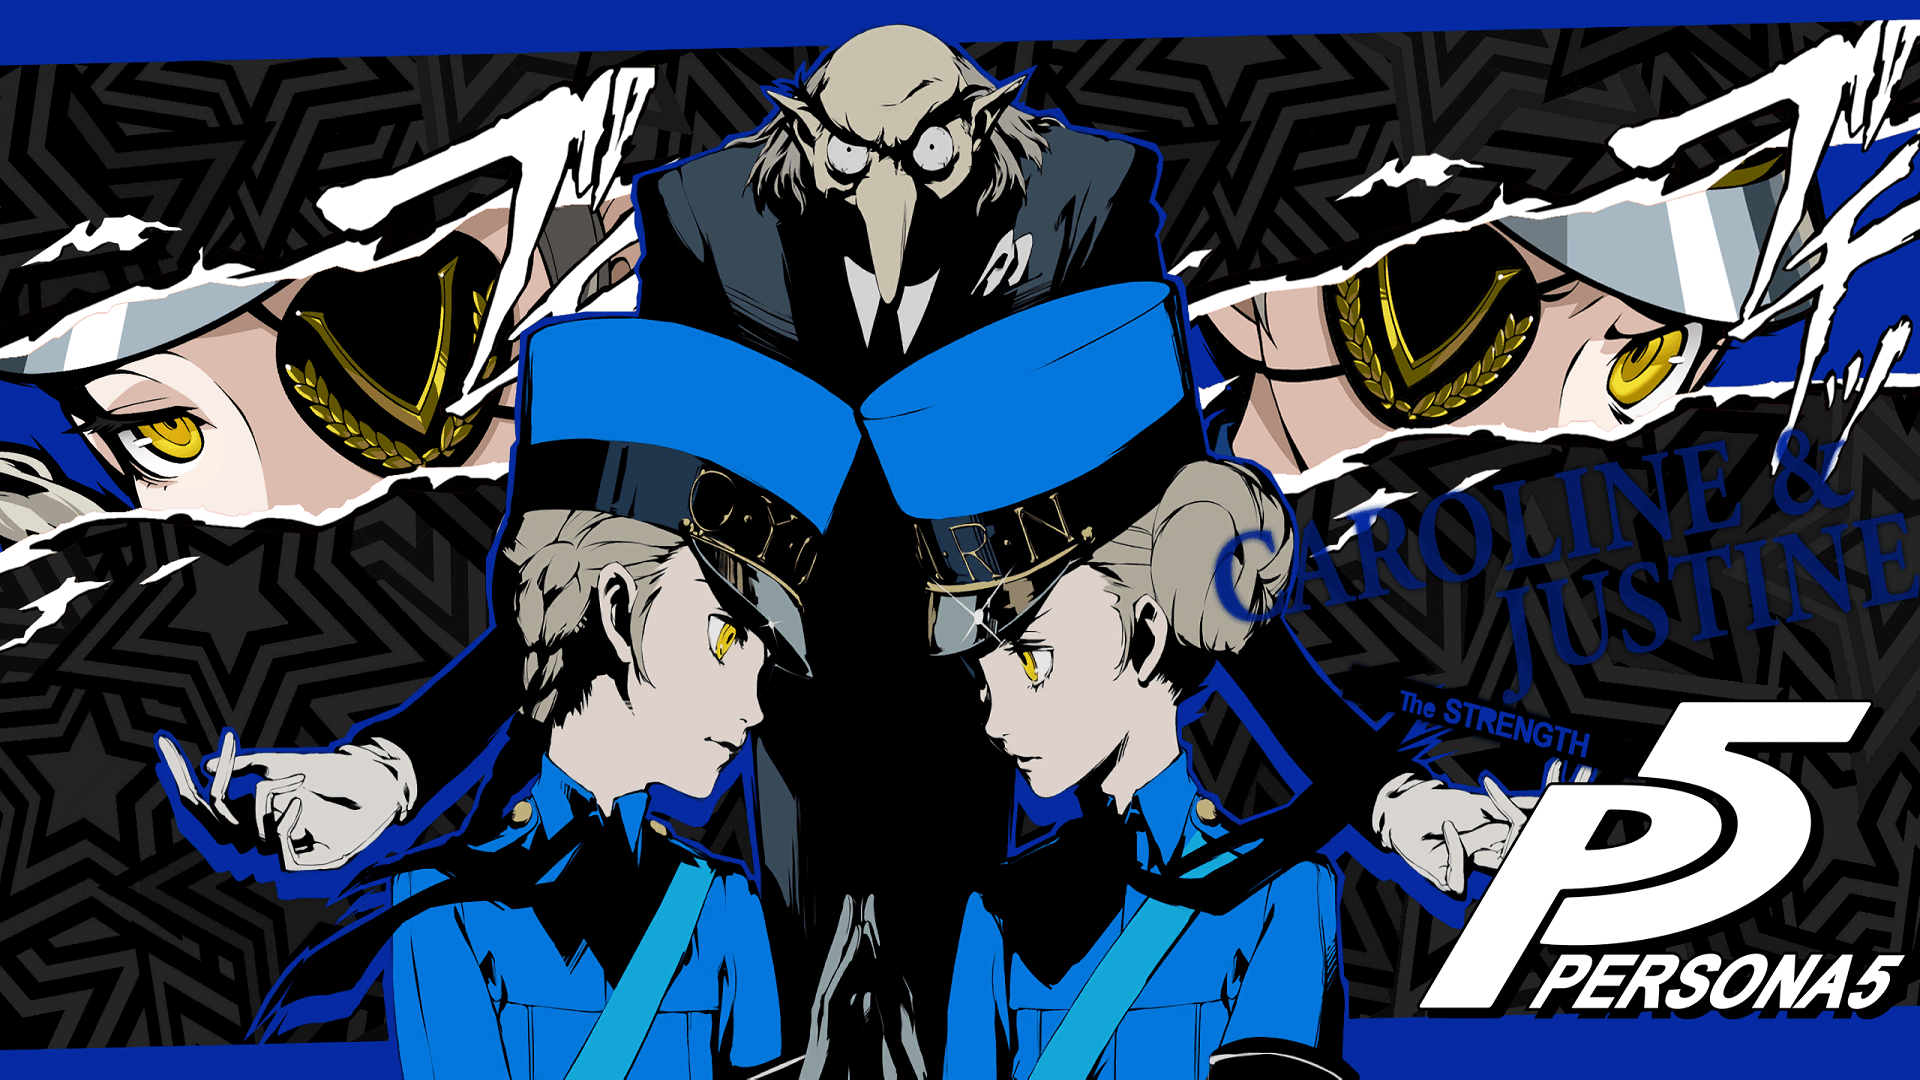 Persona 5 caroline and justine wallpapers – PS4Wallpapers